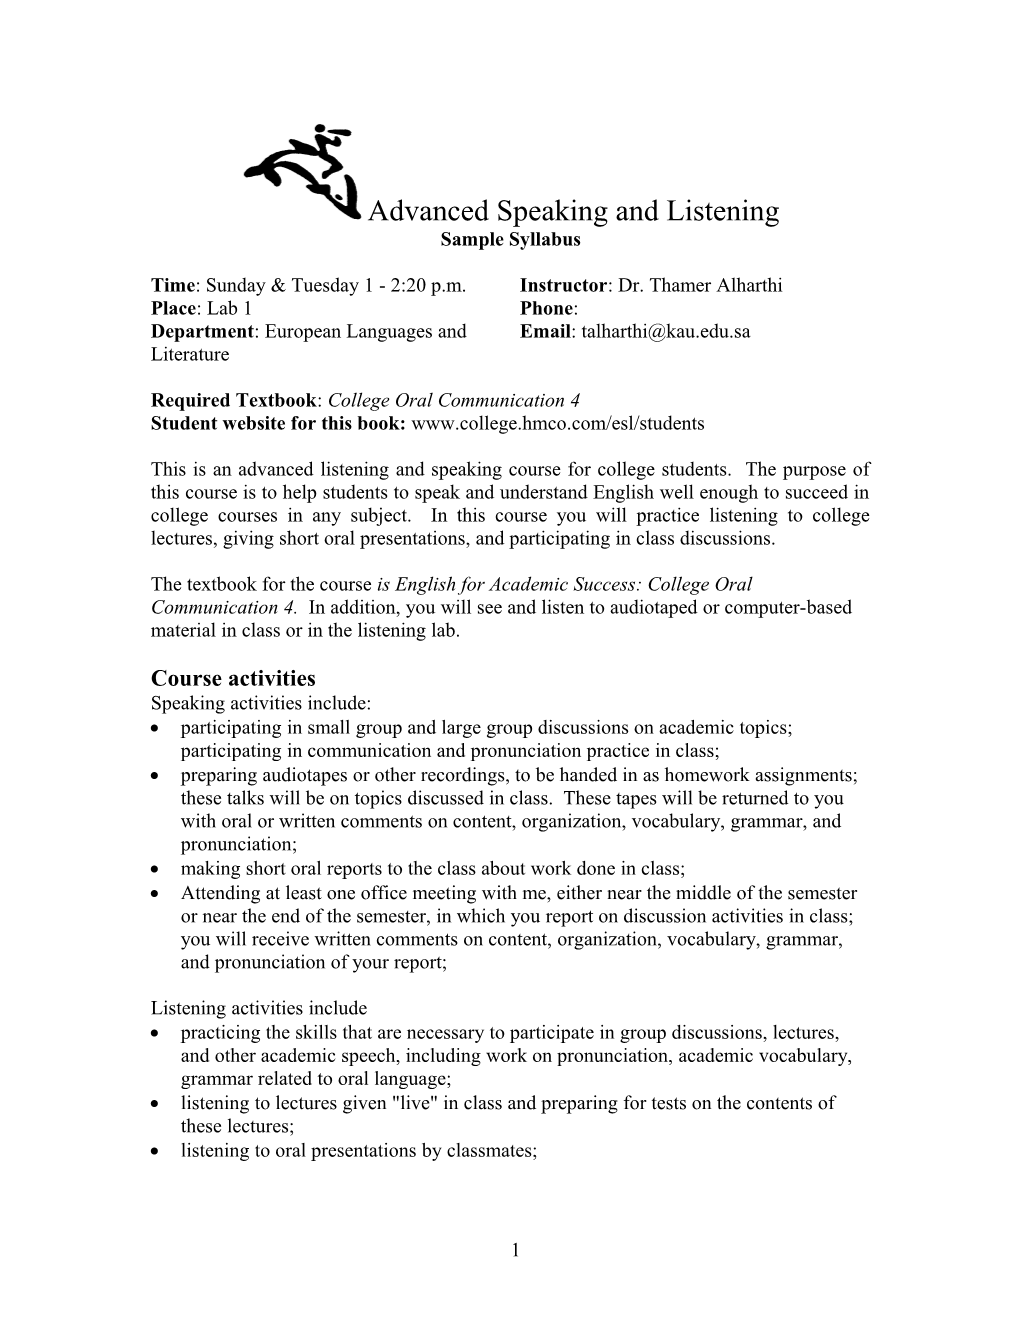 Advanced Speaking and Listening